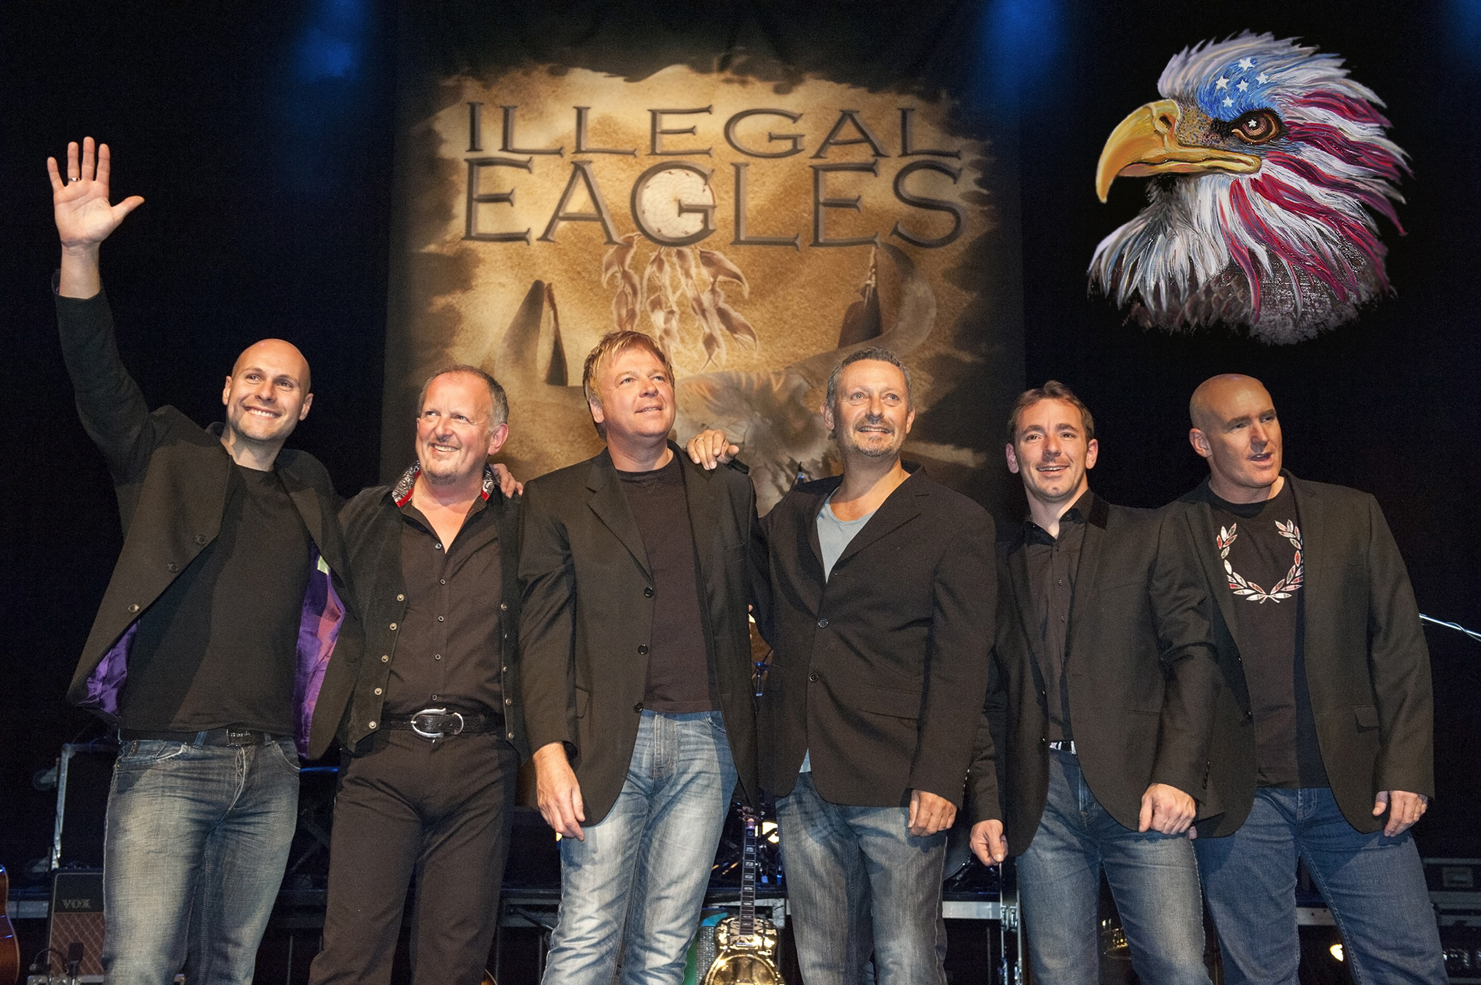 Eagles tribute act to play Caird Hall in 2020 on Scottish leg of tour